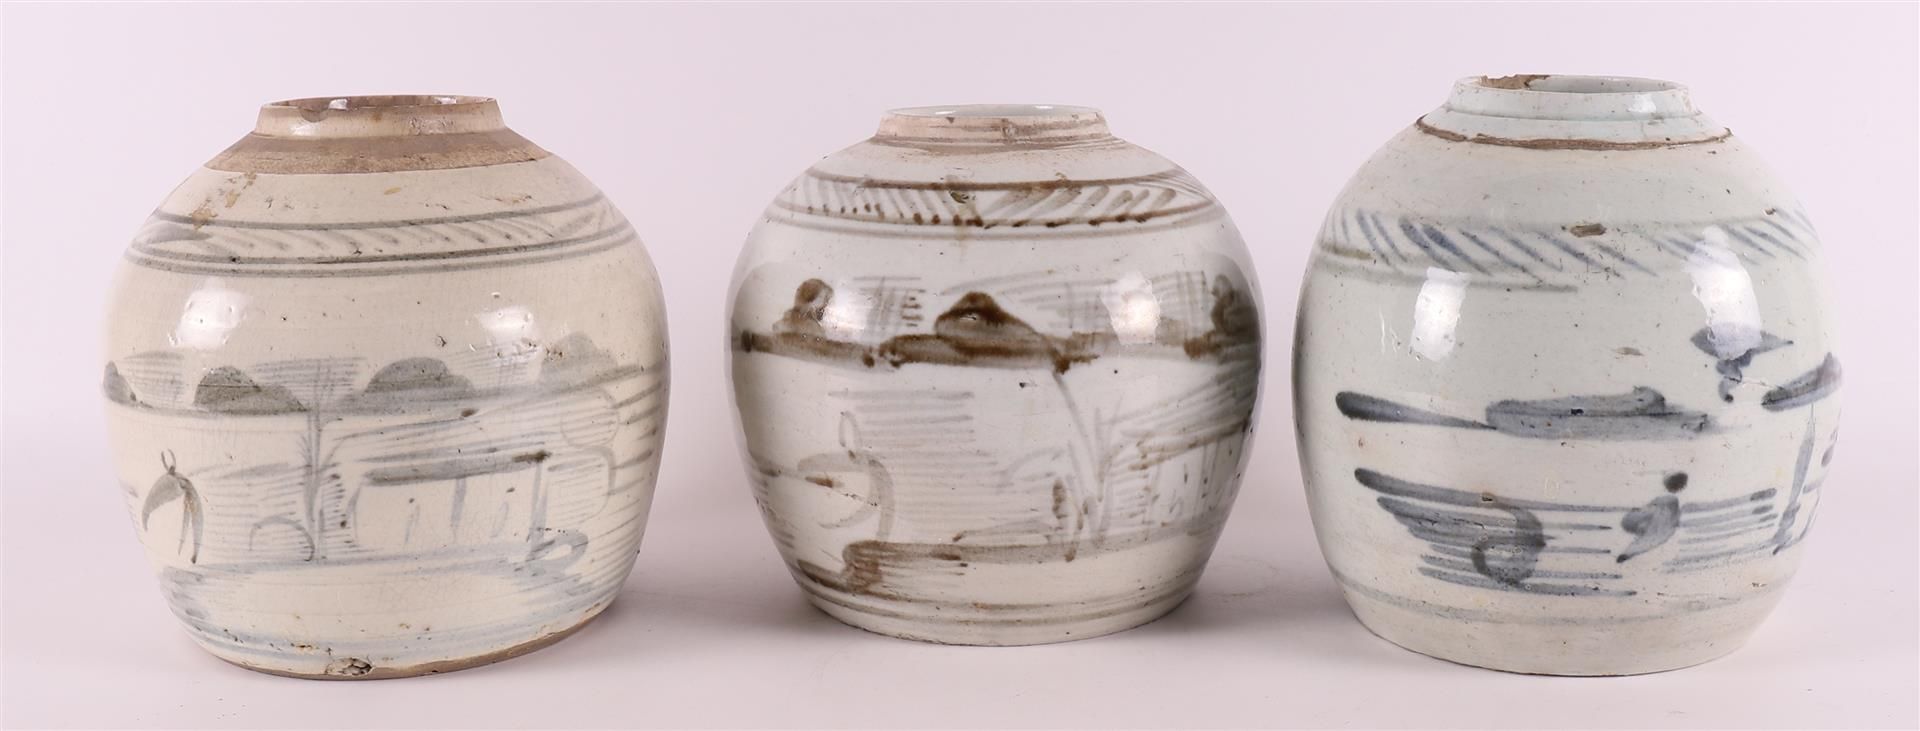 Three various porcelain ginger jars, China 19th century, h 16 c, tot. 3x (2x neck flakes/hairline).